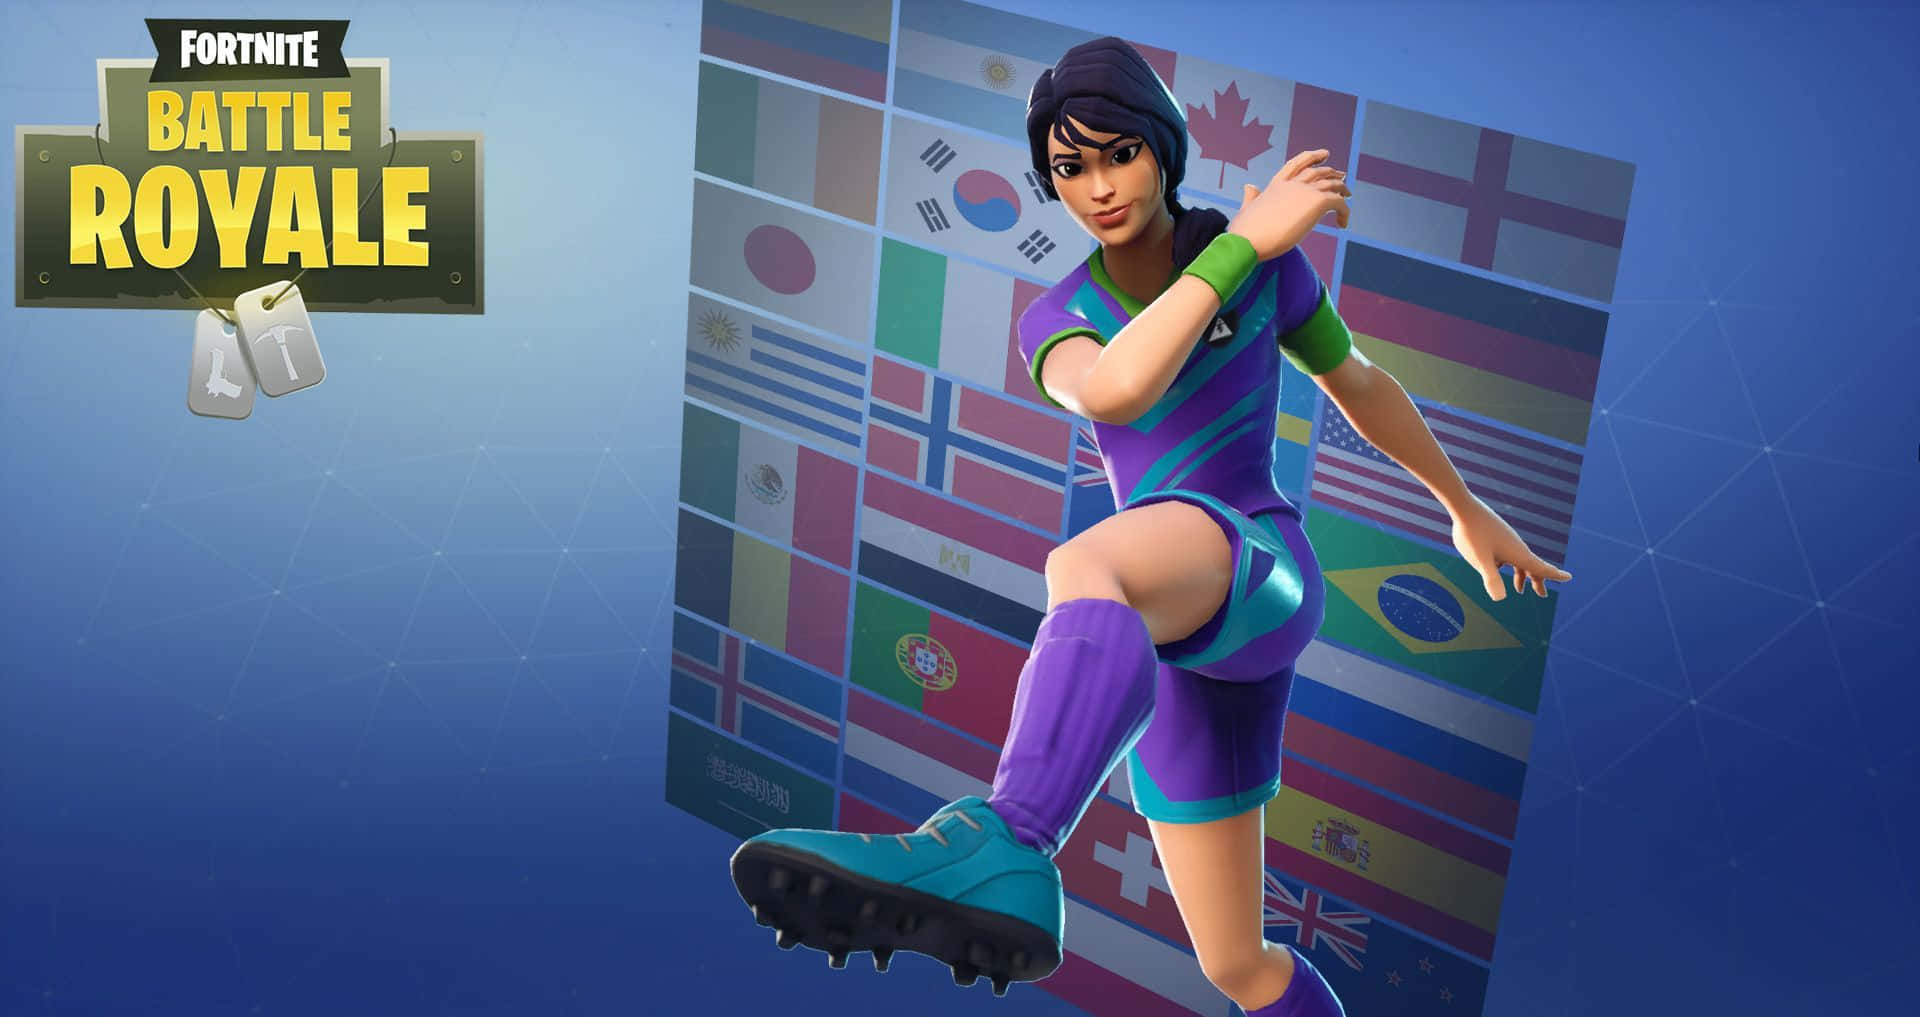 Take the field with style in the Fortnite Soccer Skin. Wallpaper